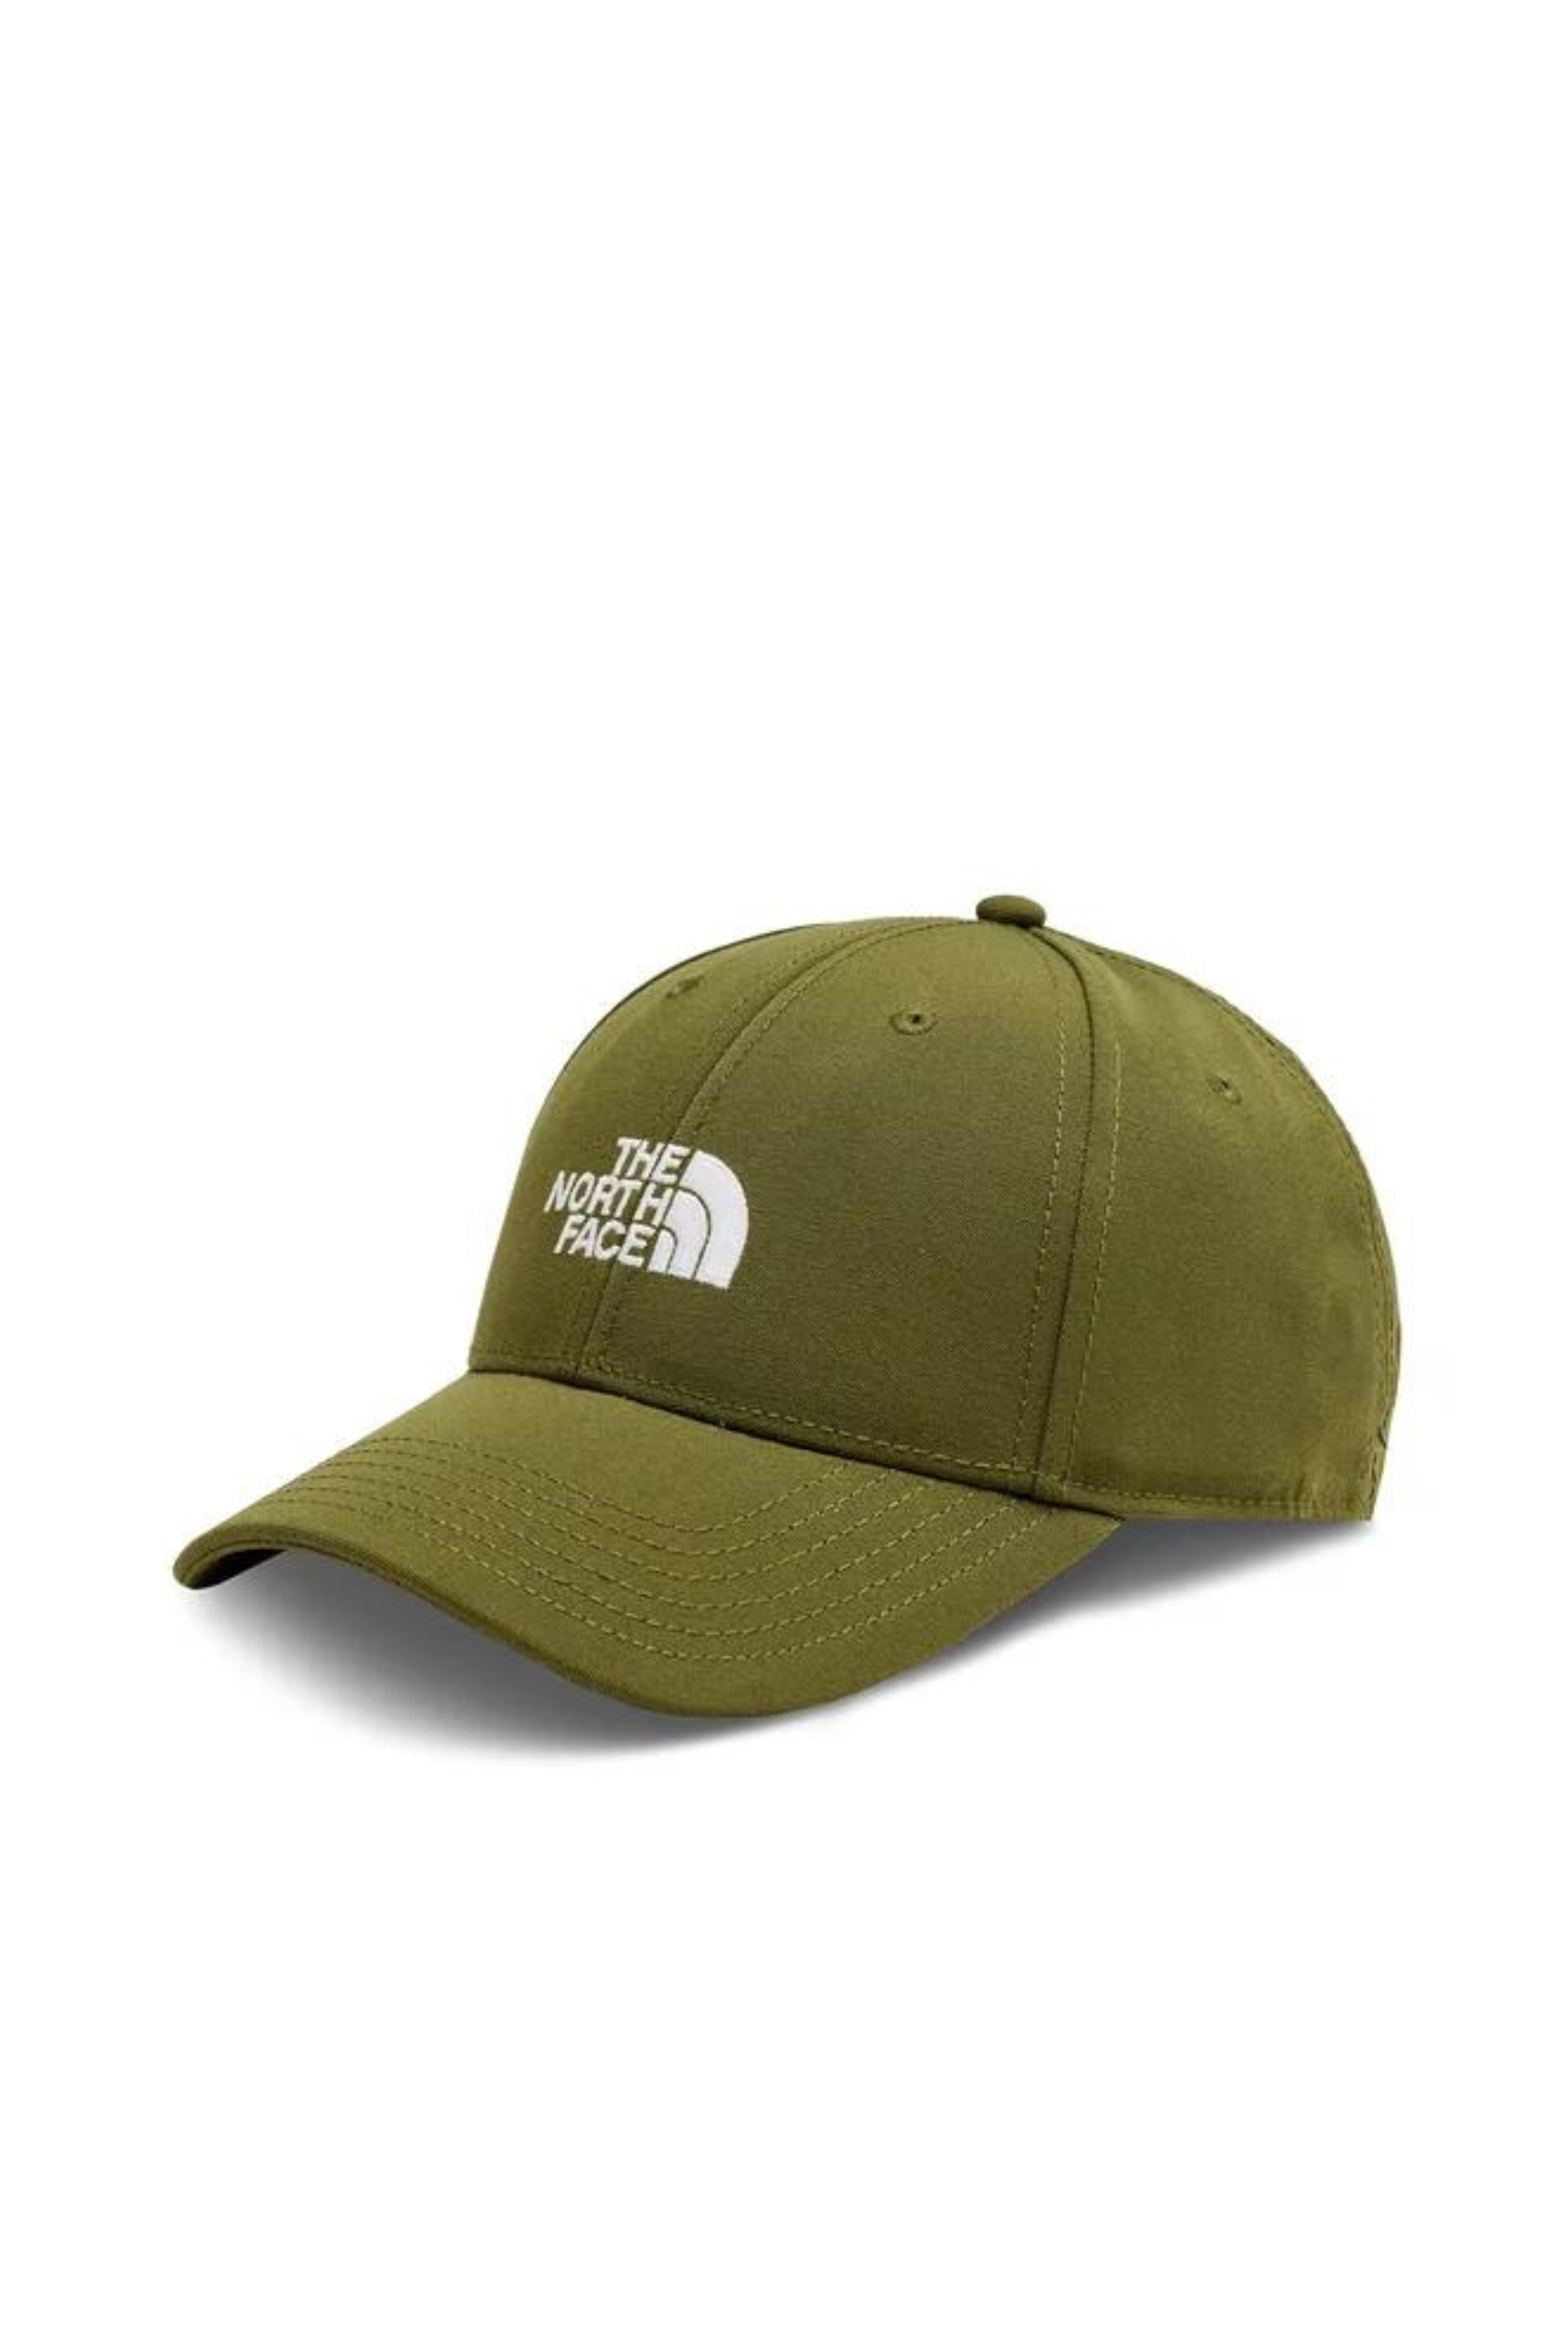 RECYCLED CLASSIC HAT - FOREST OLIVE